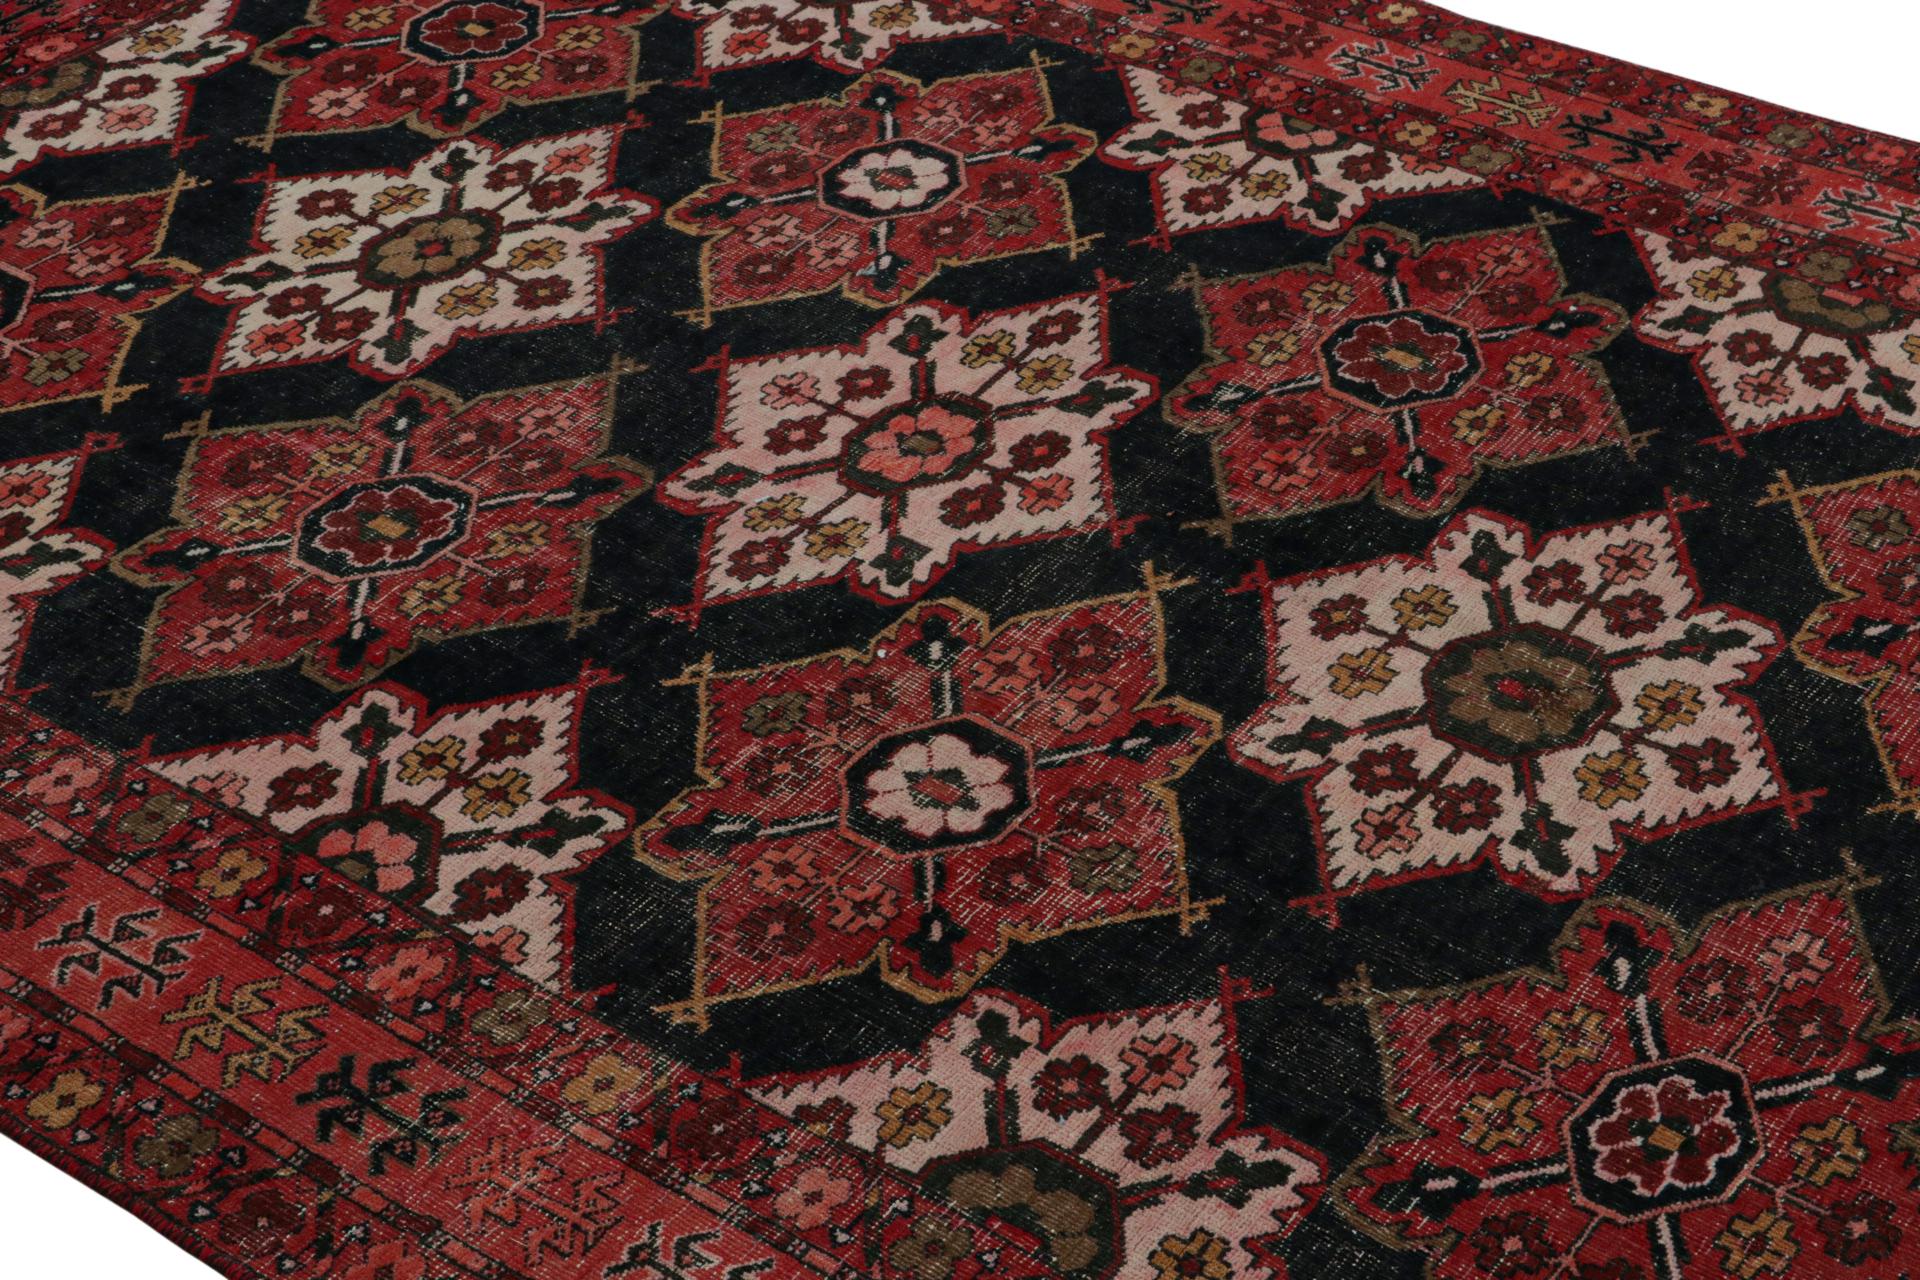 Vintage Persian Shiraz rug in Red and Black Floral Patterns by Rug & Kilim In Good Condition For Sale In Long Island City, NY